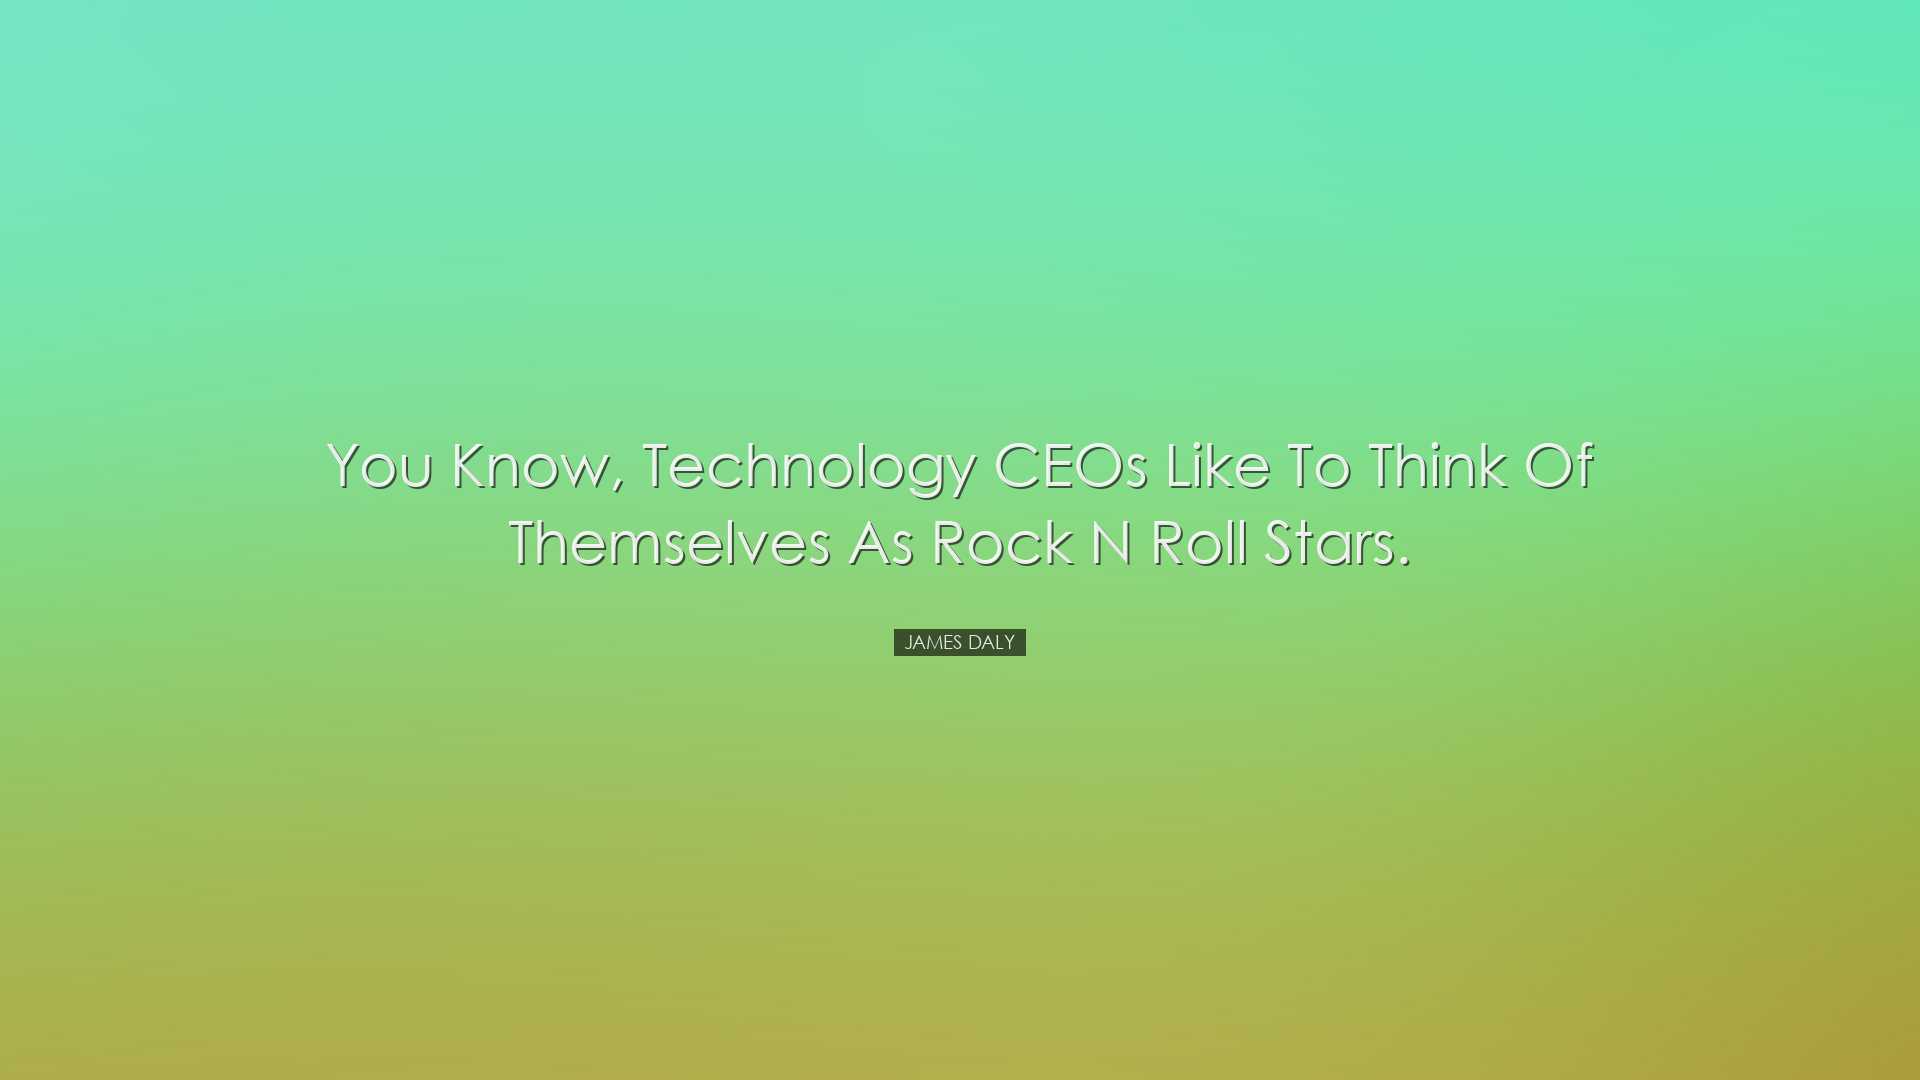 You know, technology CEOs like to think of themselves as rock n ro